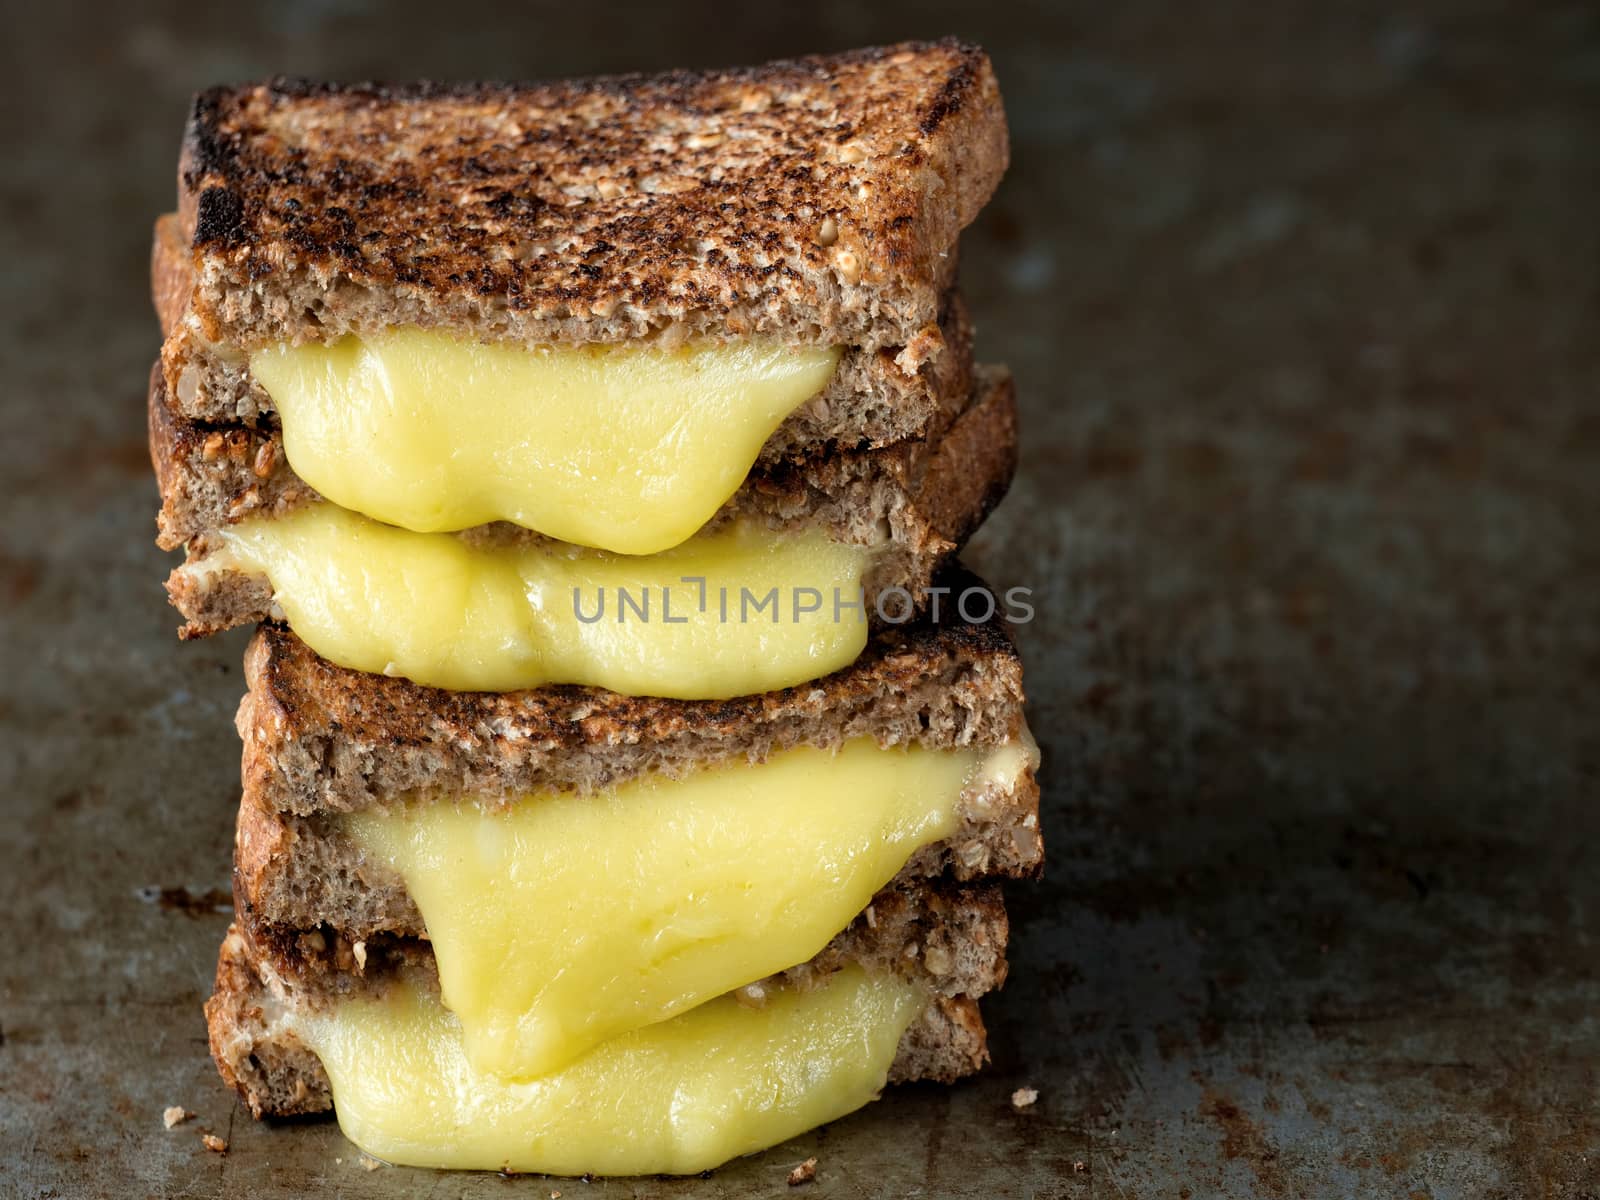 rustic american grilled cheese sandwich by zkruger